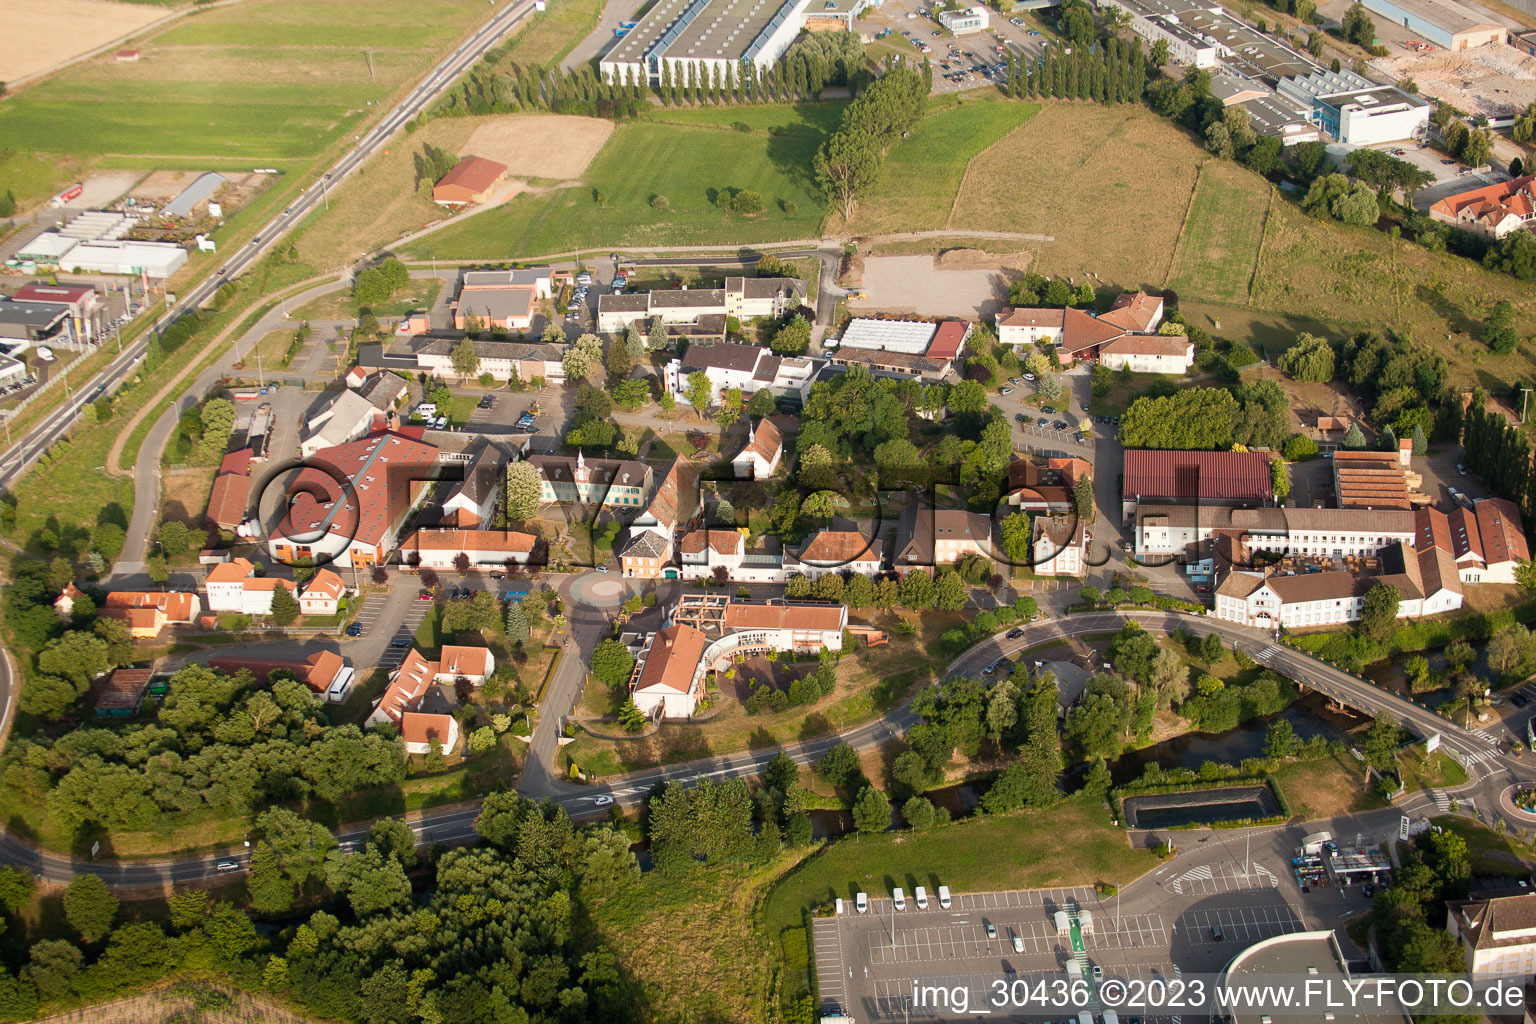 Bischwiller in the state Bas-Rhin, France seen from above